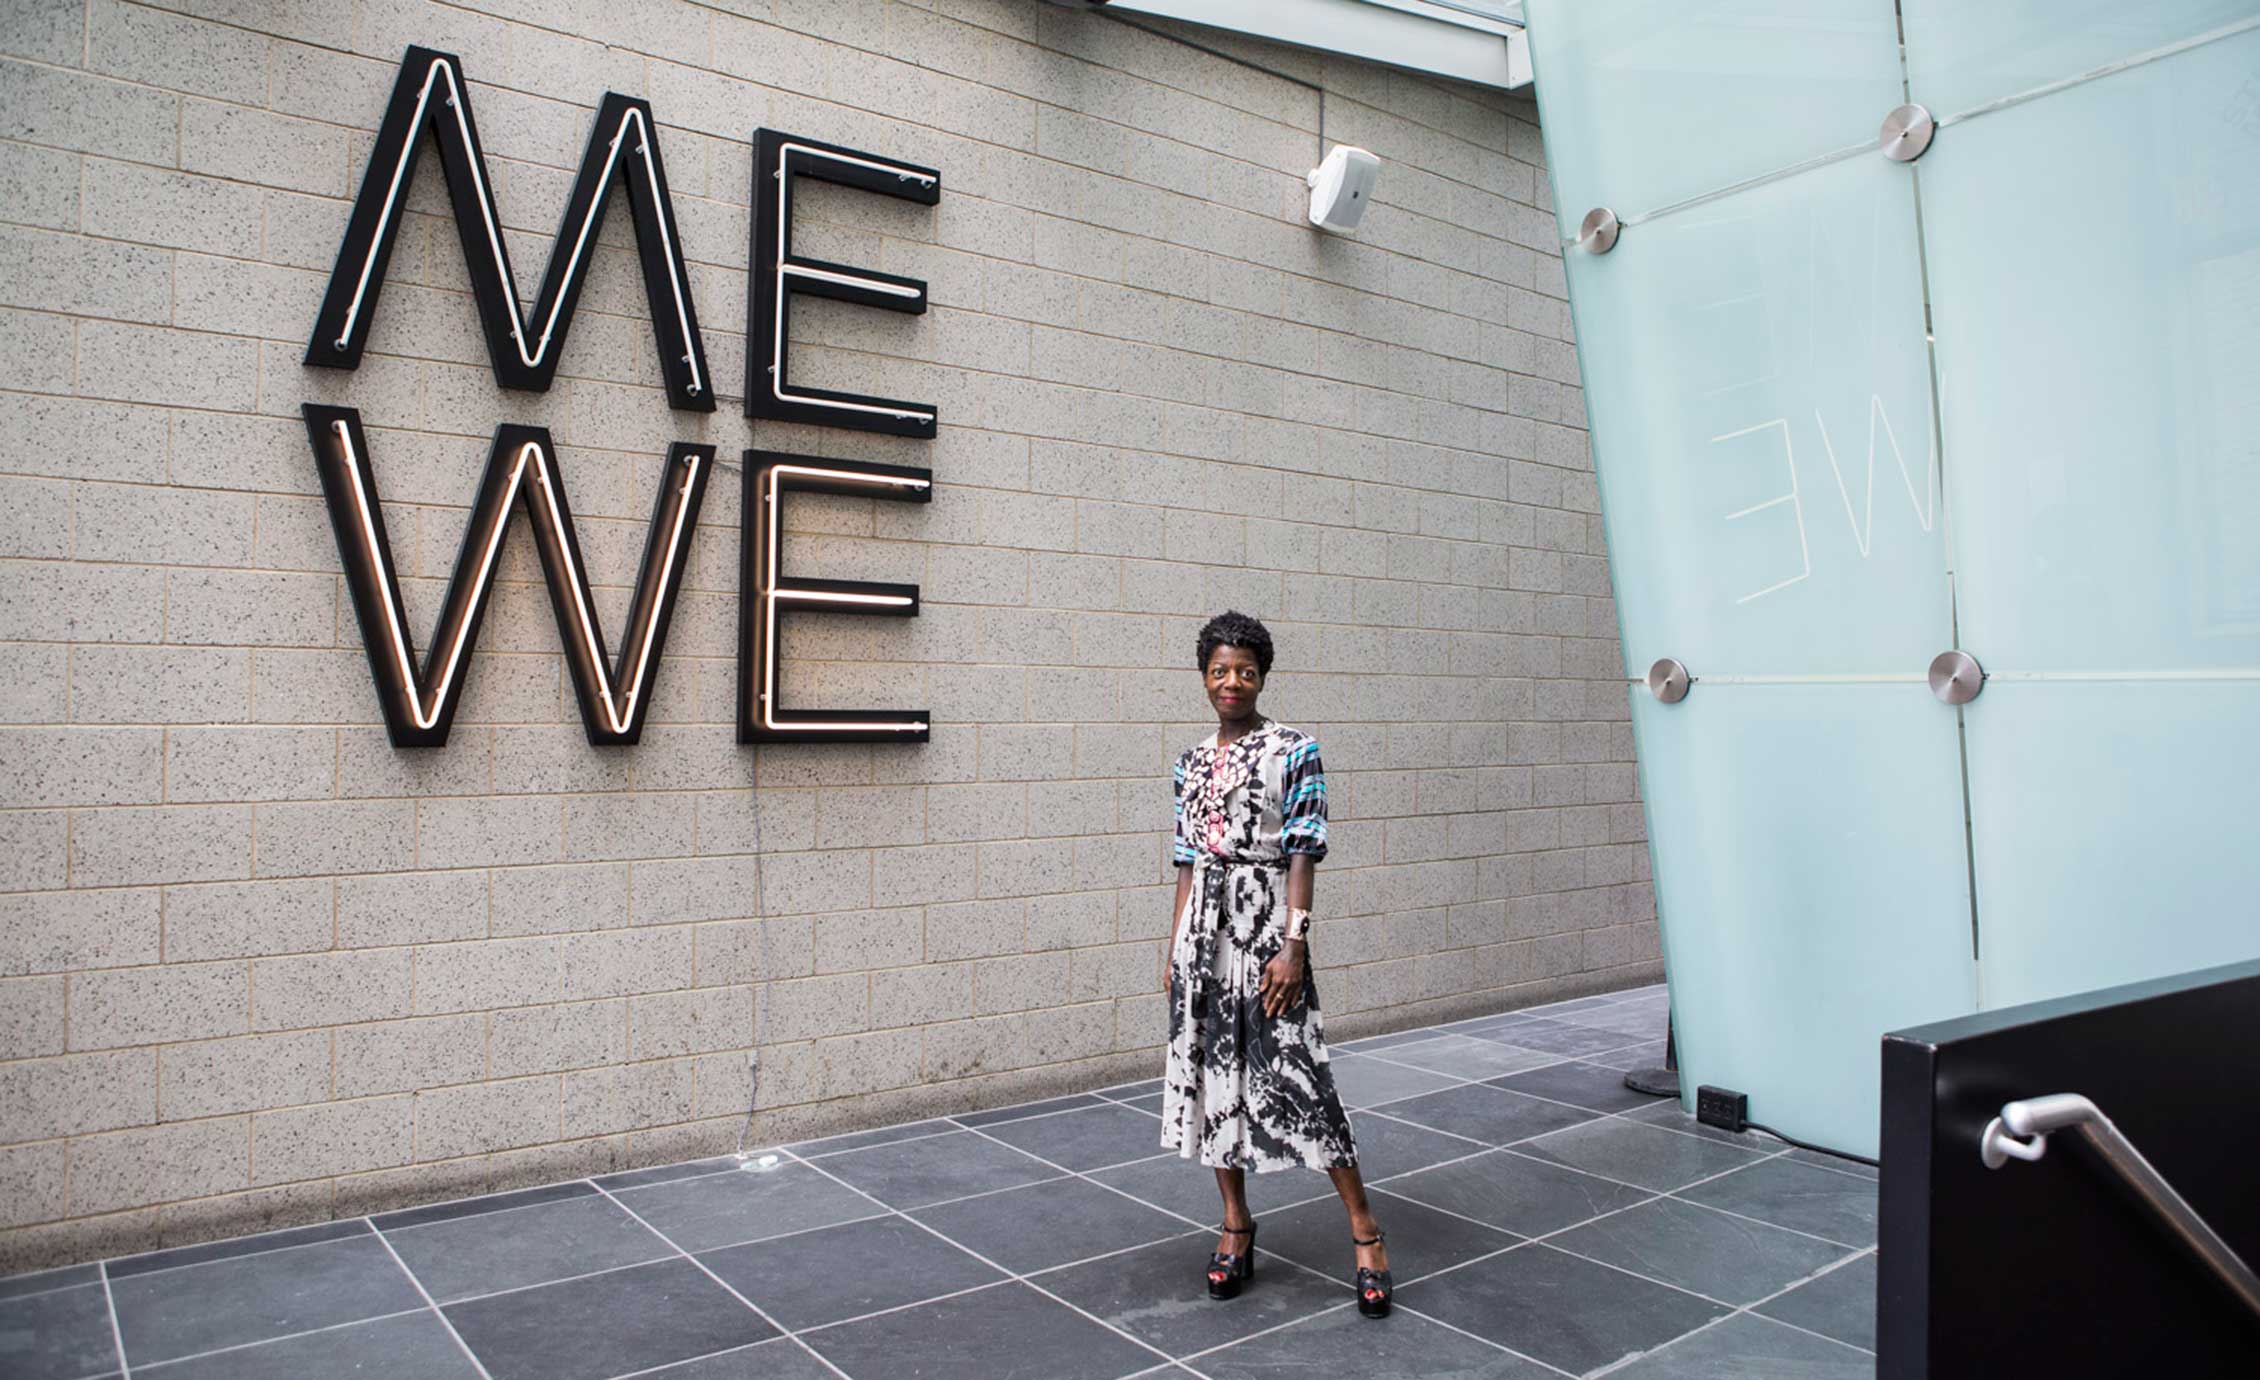 Thelma Golden with Glenn Ligon’s Give us a Poem (Palindrome #2) at the Studio Museum in Harlem